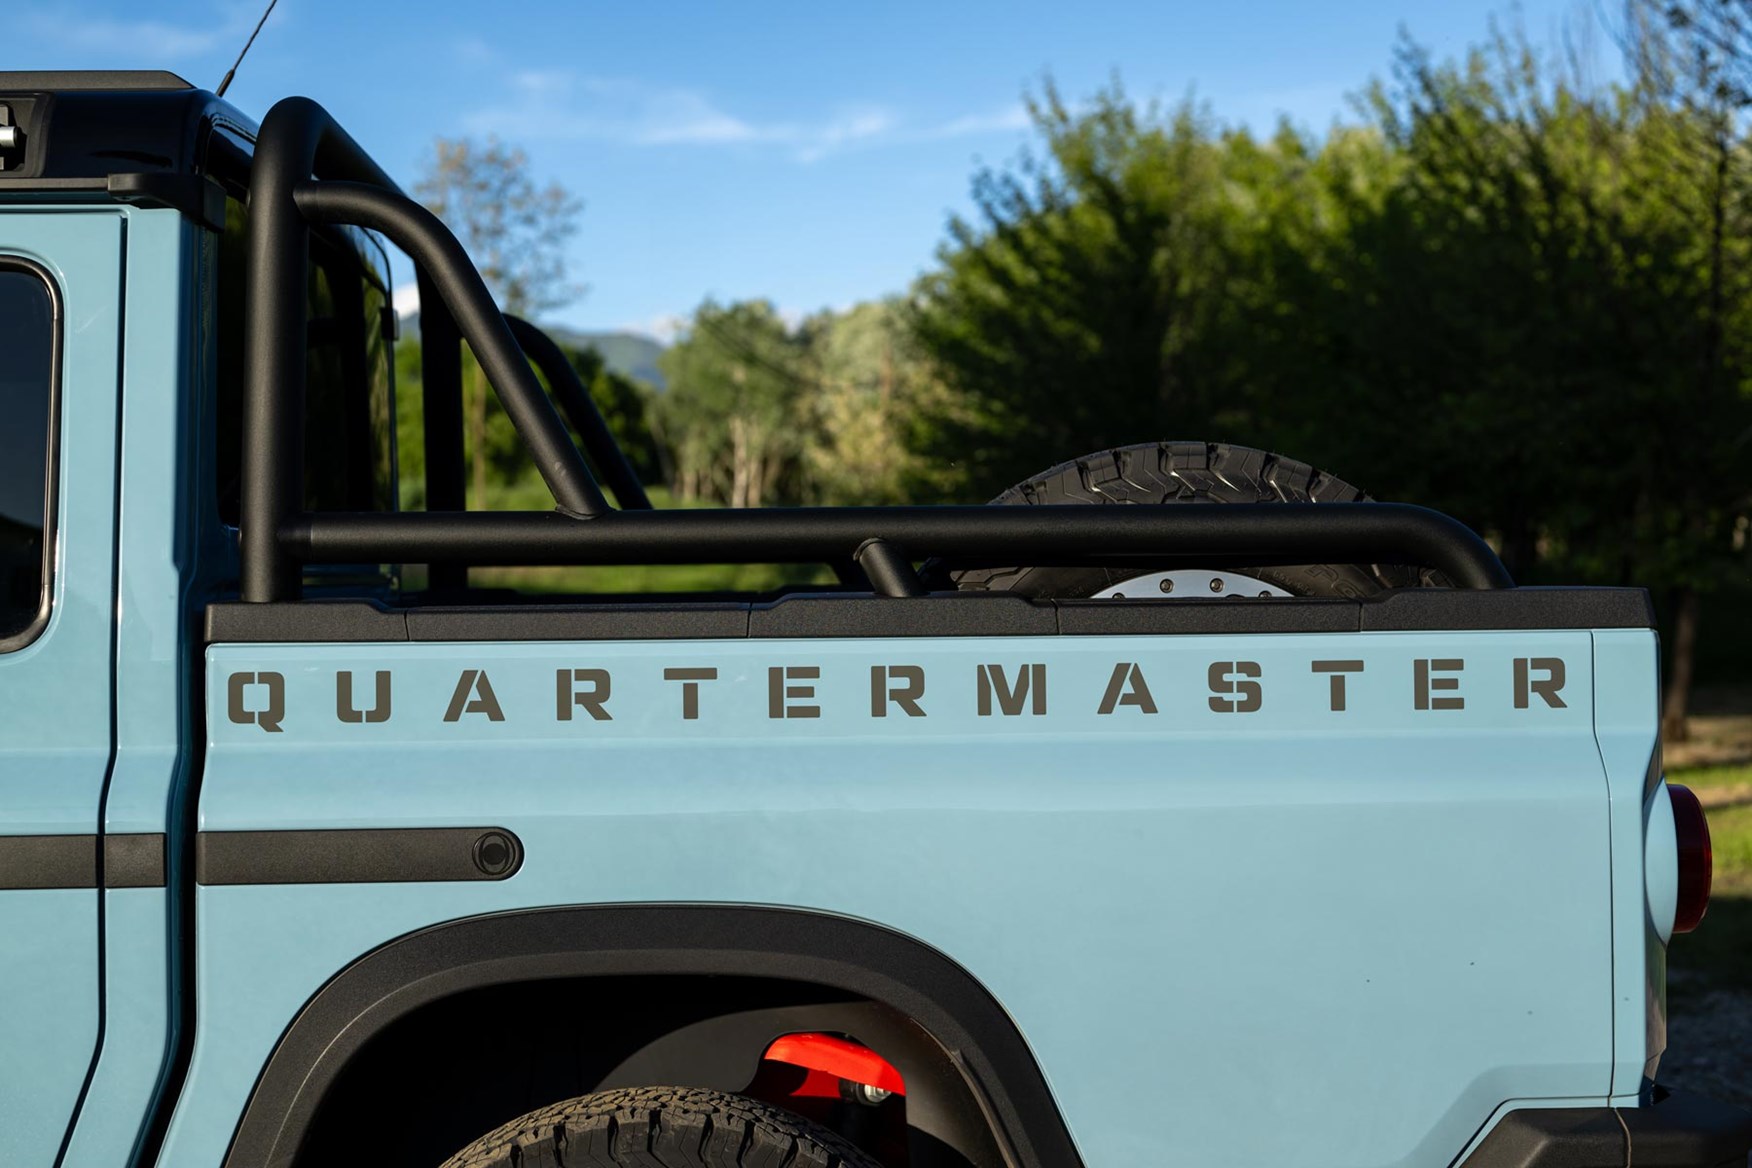 All of the Quartermaster's extra length goes onto the rear of the vehicle.